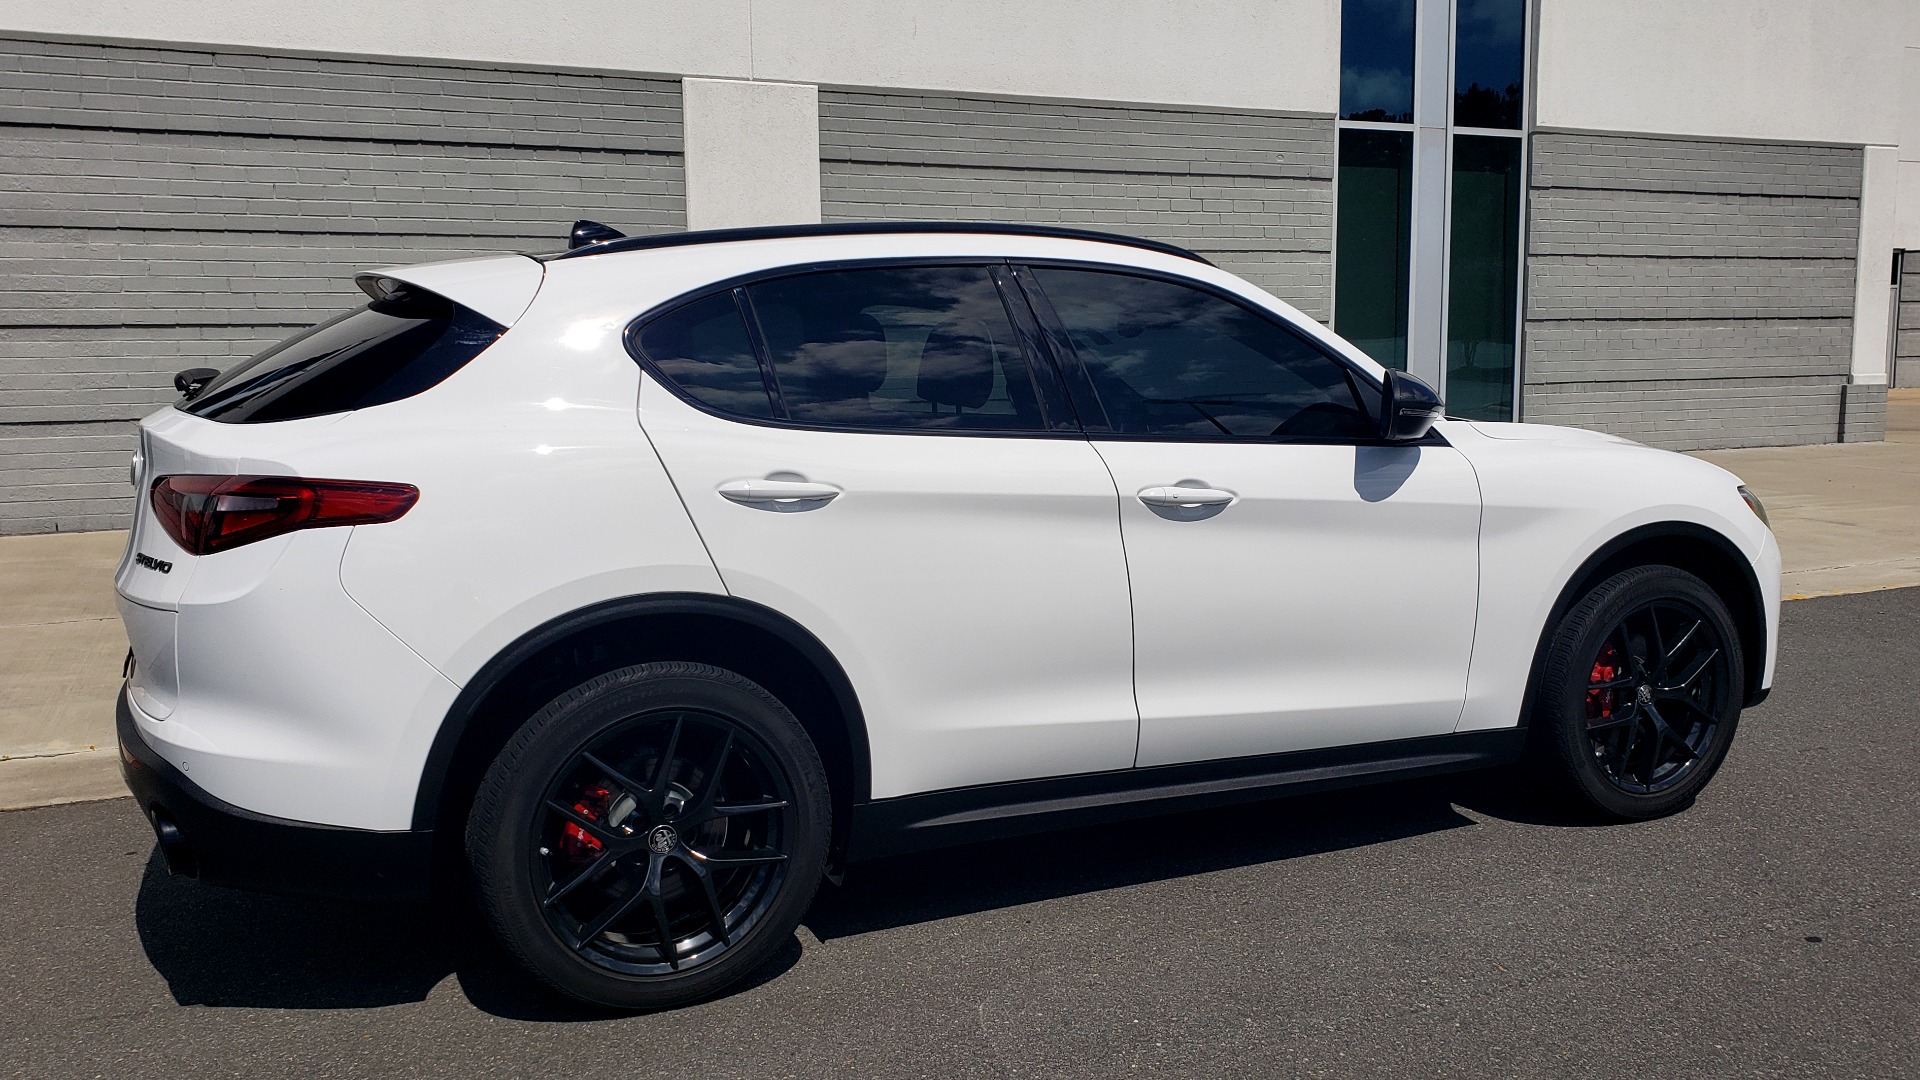 Used 2019 Alfa Romeo STELVIO TI SPORT AWD / 2.0L TURBO / 8-SPD AUTO / DRVR ASST / REARVIEW for sale Sold at Formula Imports in Charlotte NC 28227 4